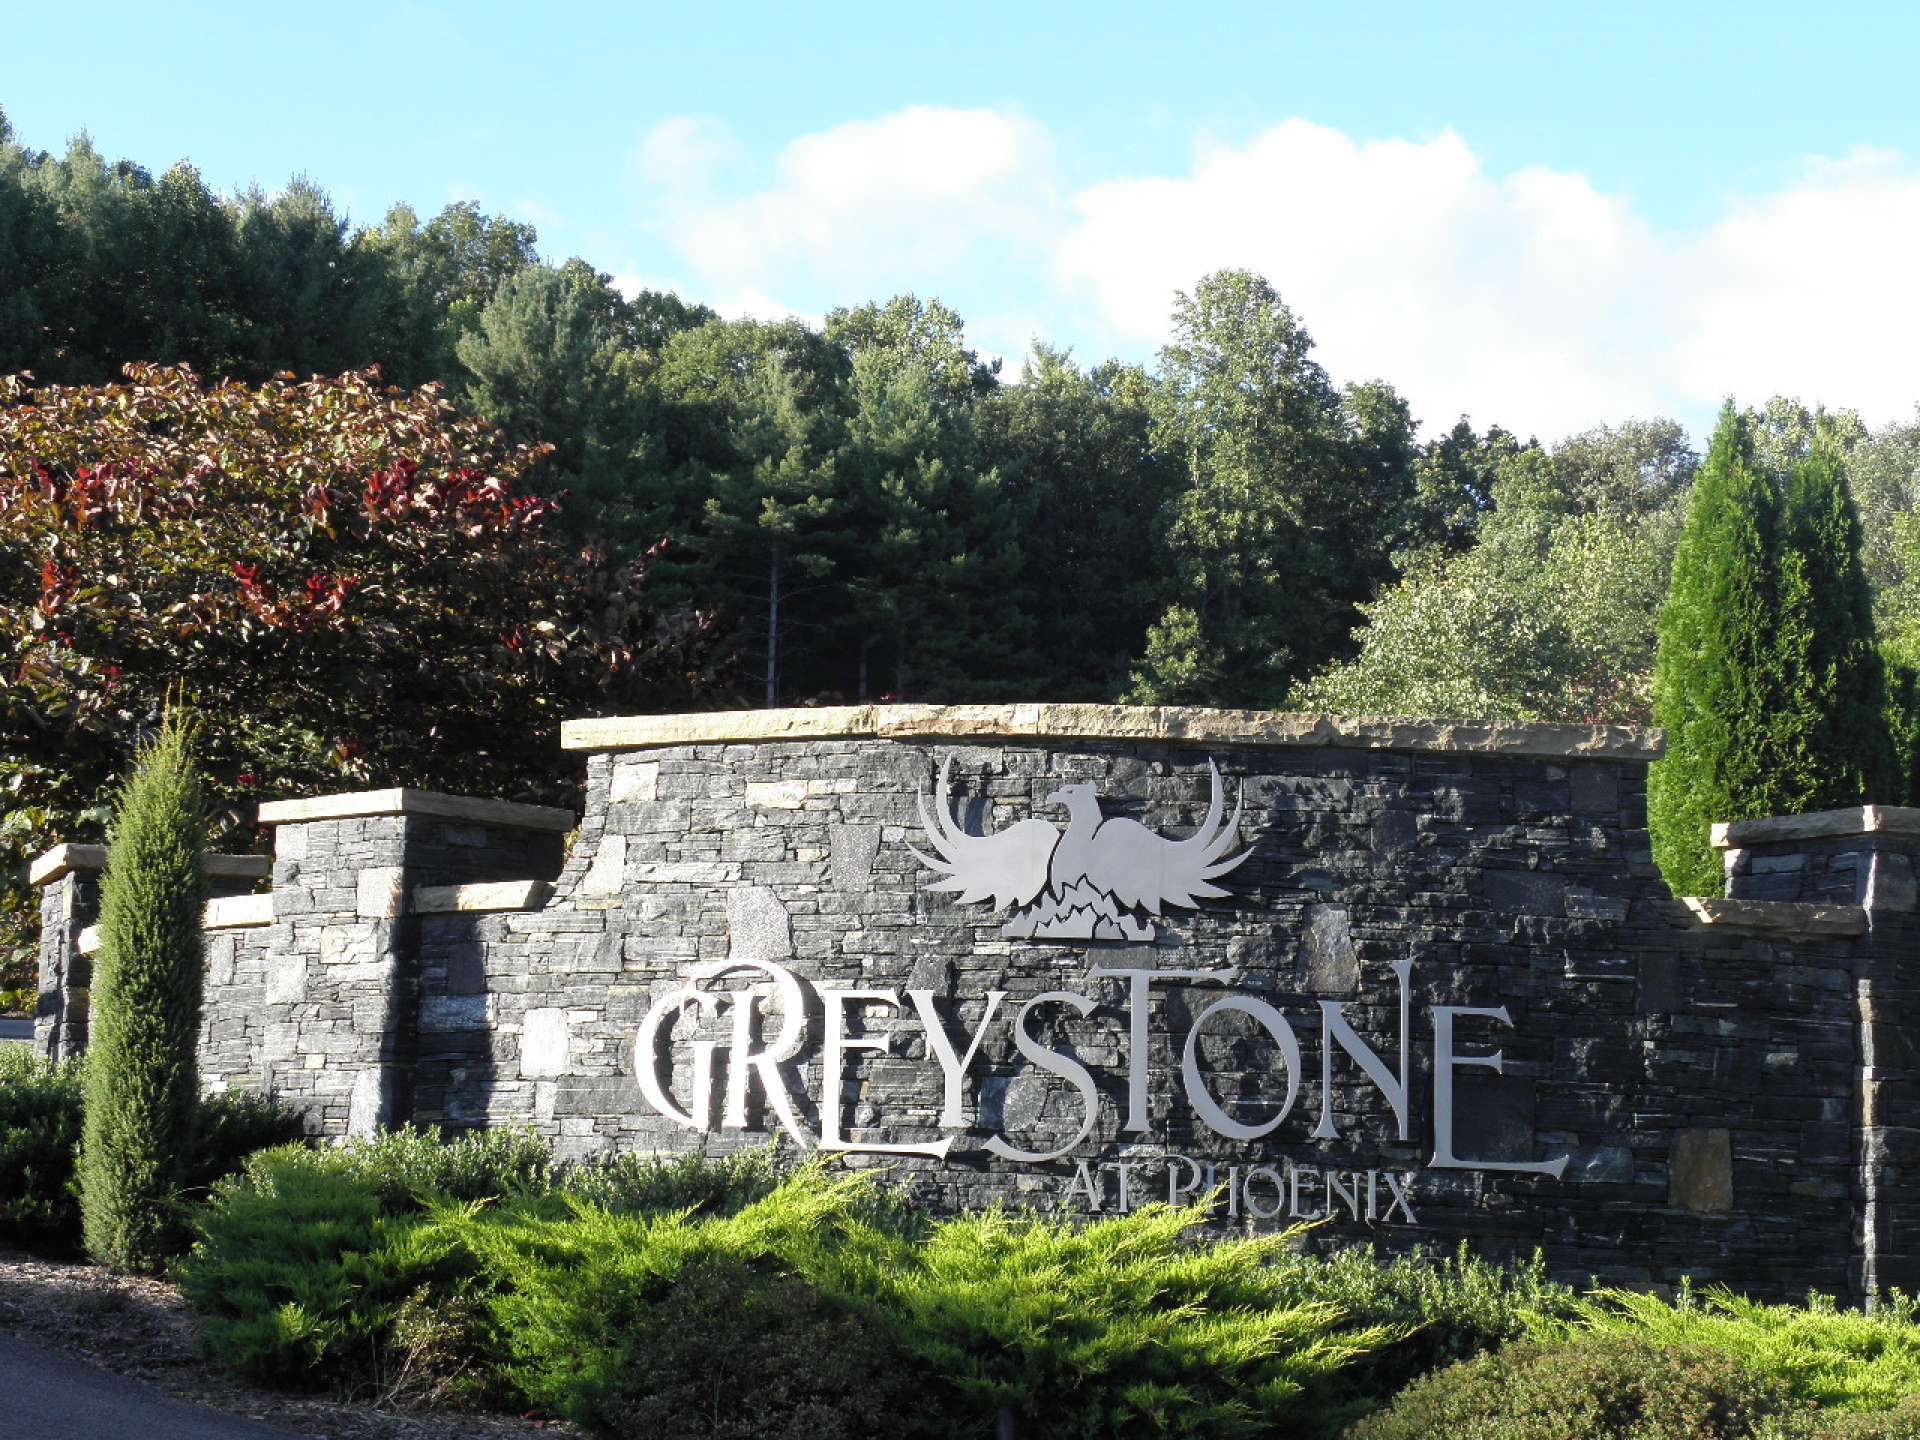 Greystone at Phoenix is beautifully landscaped and offers ideal homesites for those looking for big views in an upscale gated neighborhood.